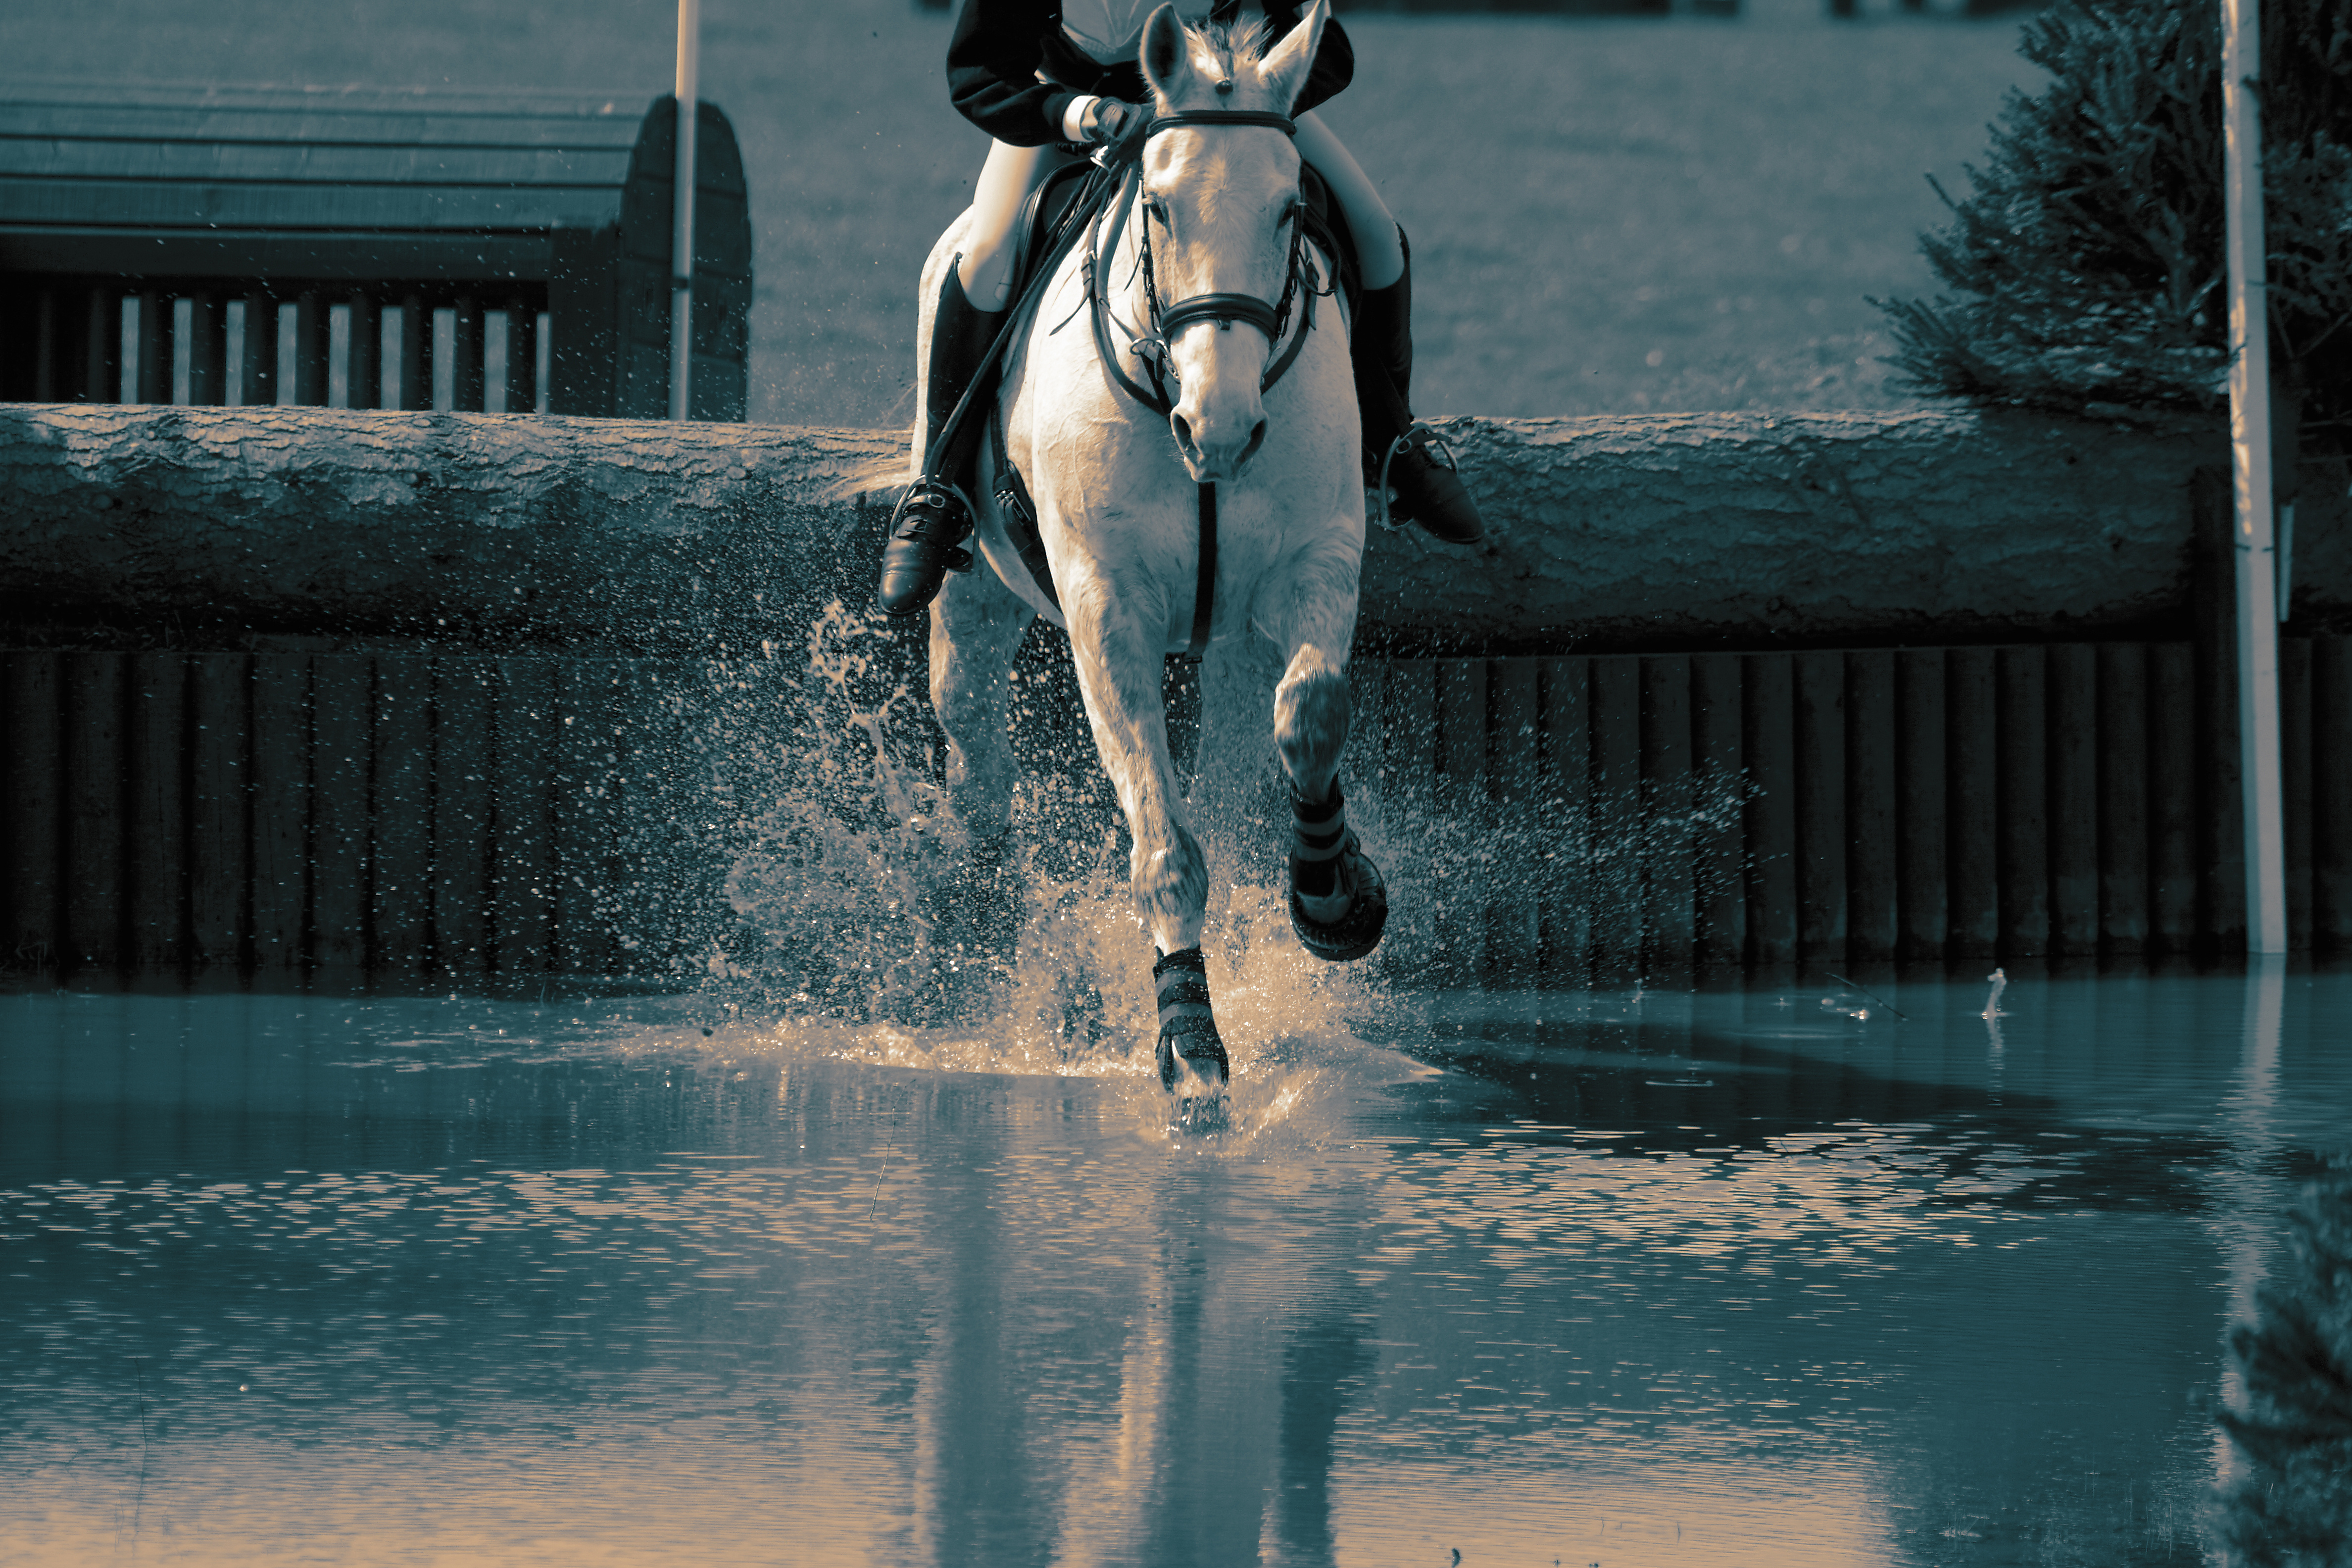 An eventing horse entering a water obstacle.